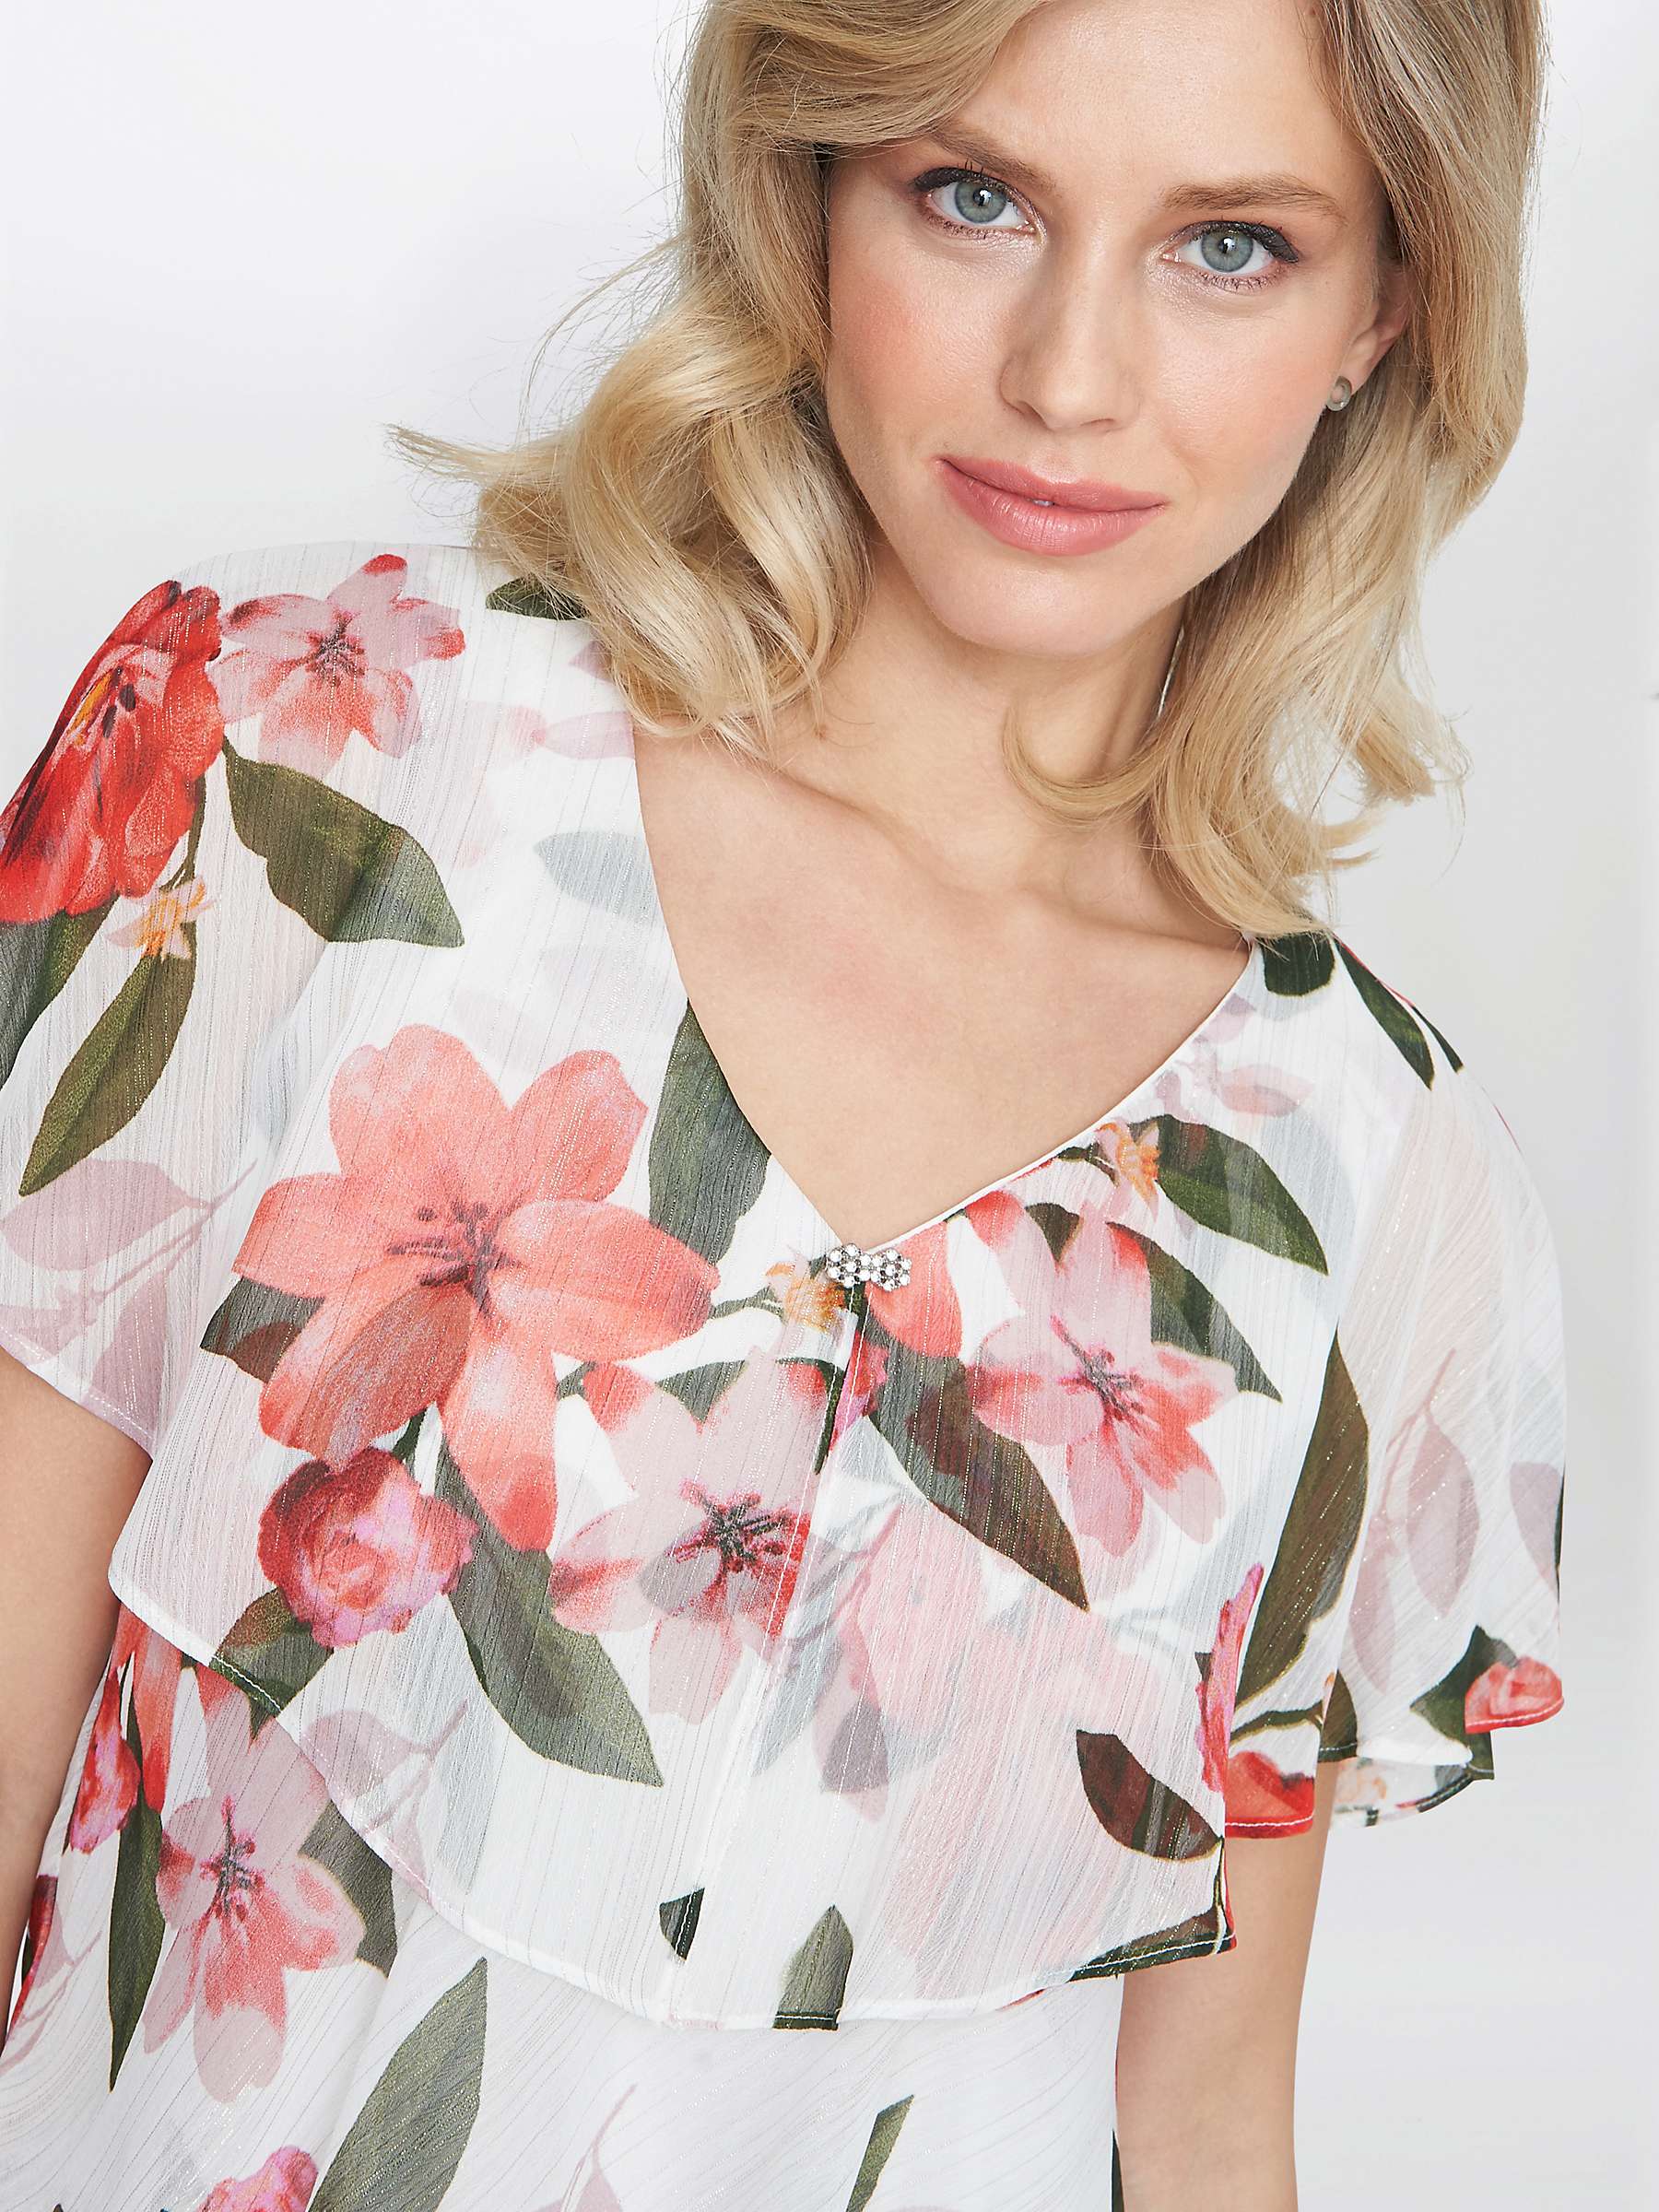 Buy Gina Bacconi Andie Floral Print Tiered Dress, Ivory/Multi Online at johnlewis.com